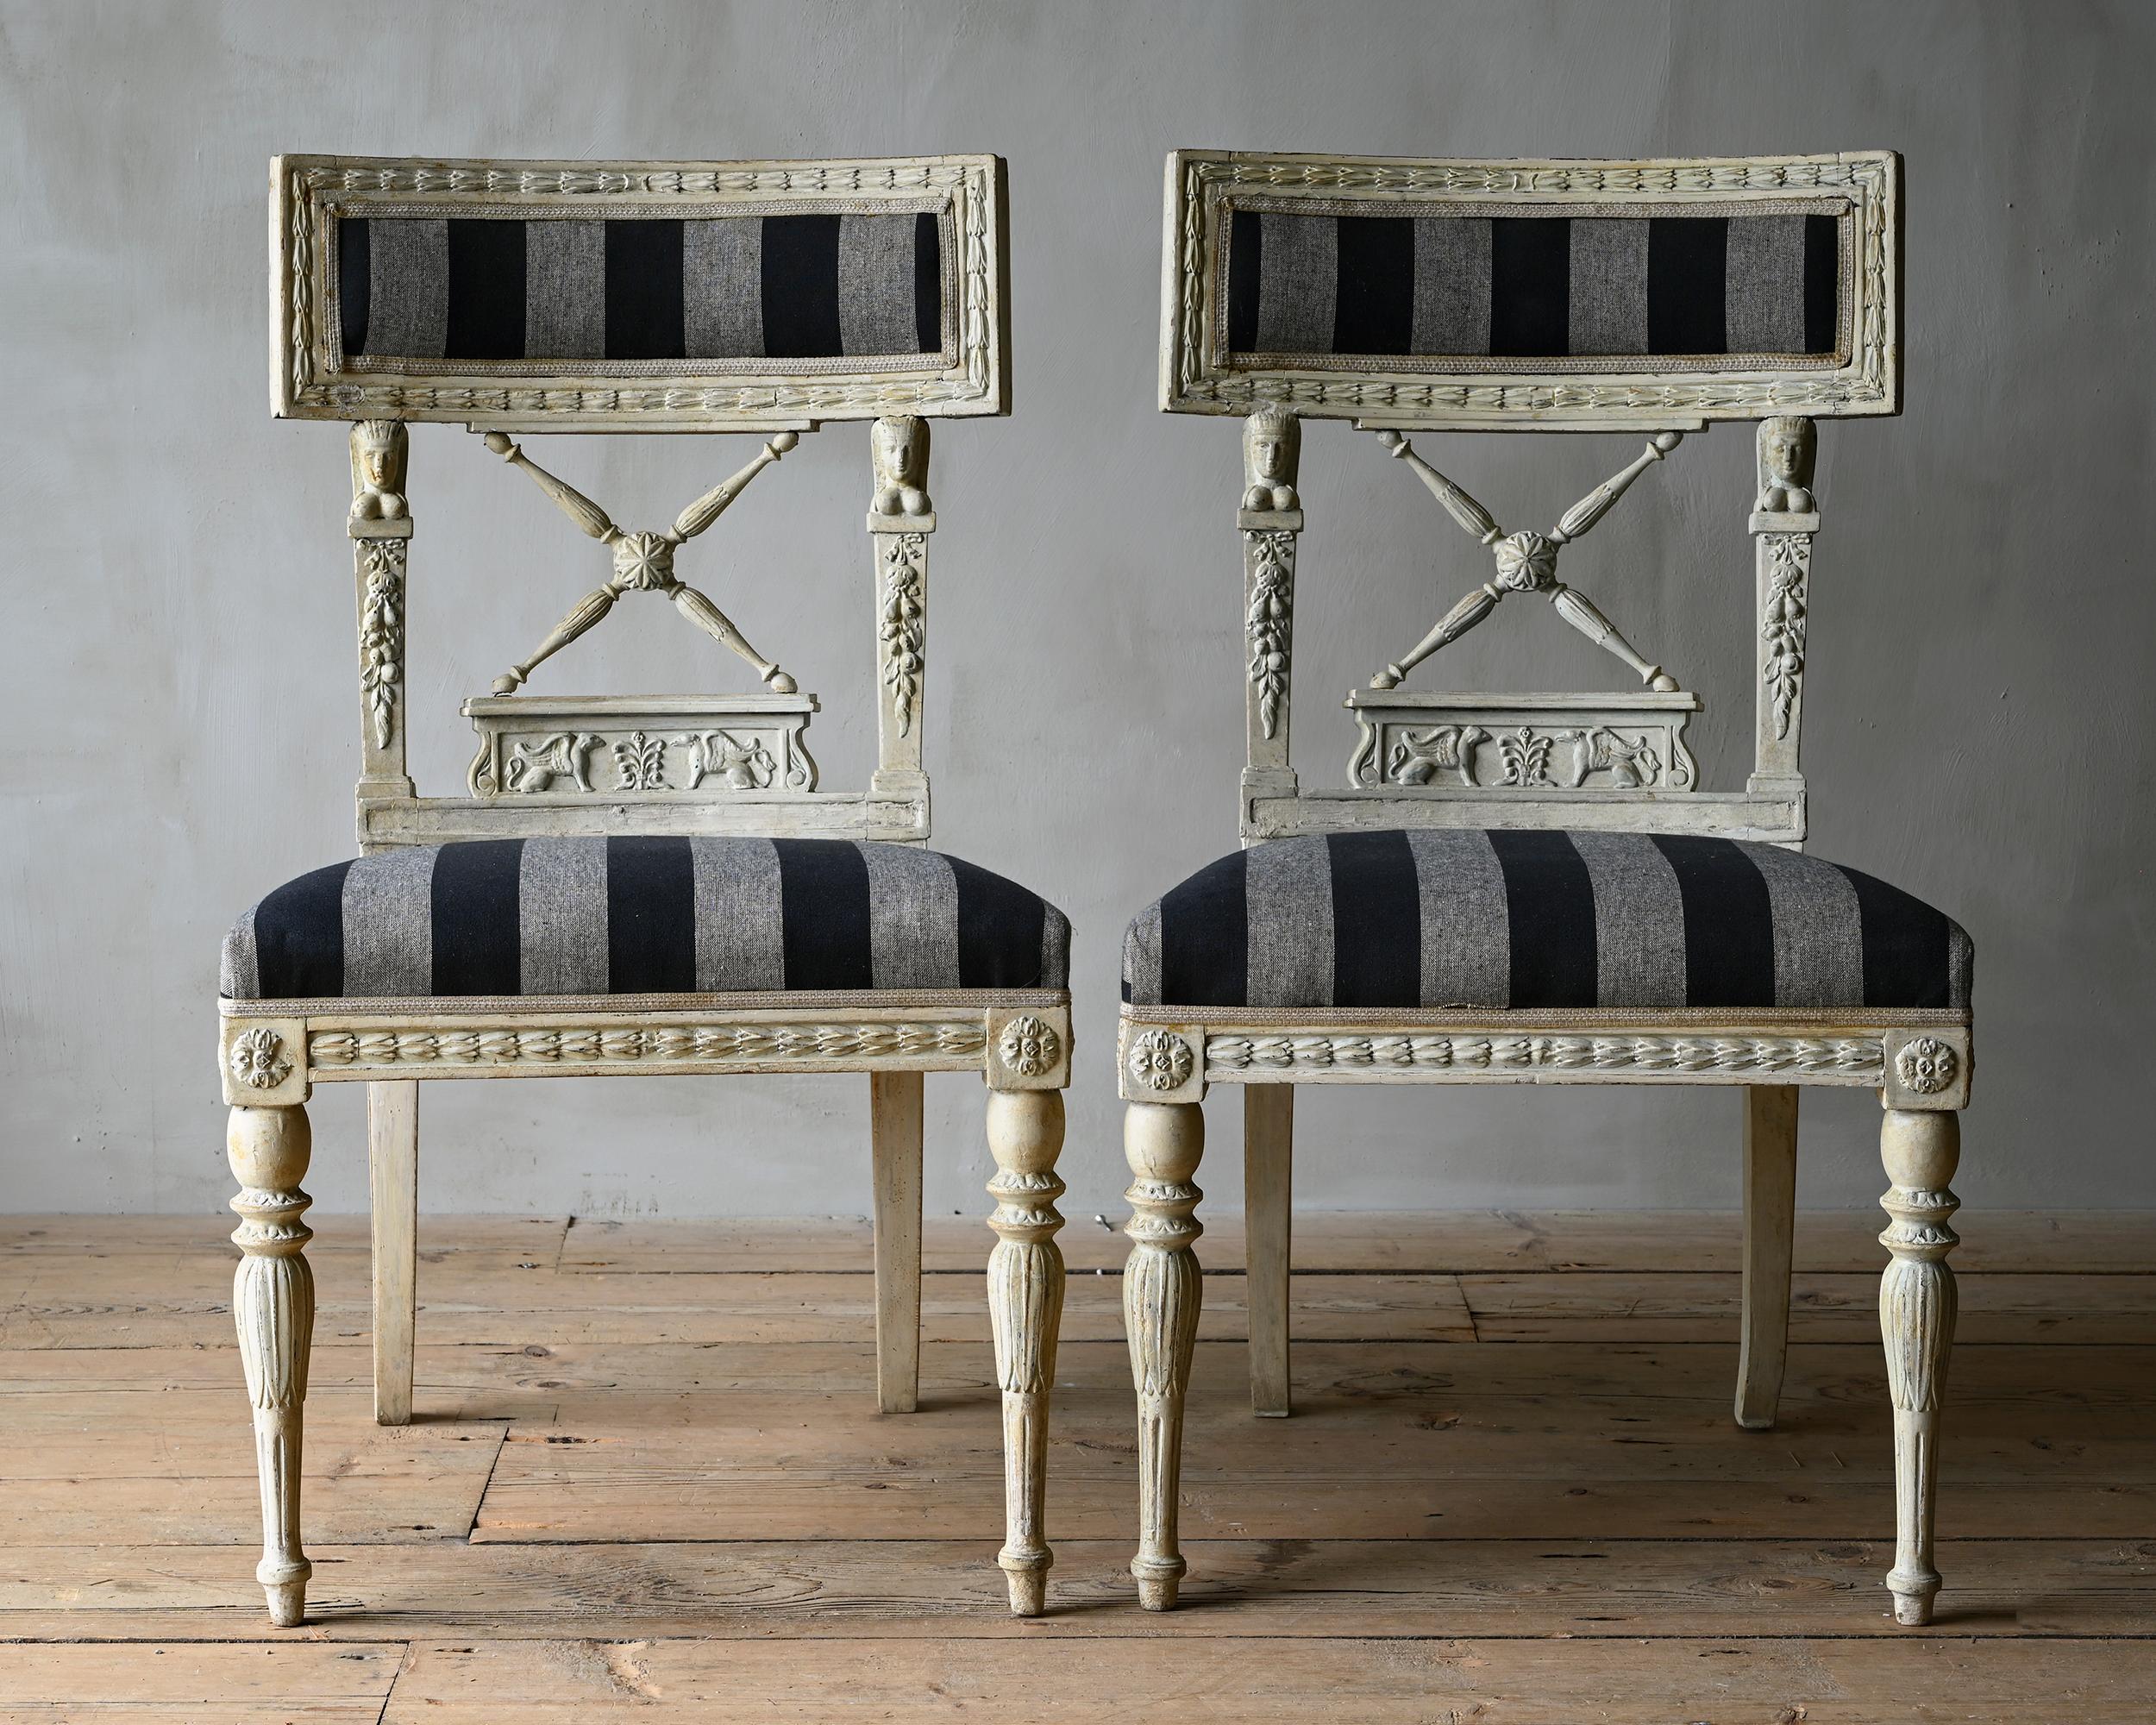 Exceptional pair of early 19th century Swedish / Scandinavian Gustavian chairs in Egyptian taste. Ca 1810 Stockholm, Sweden. 

Attributed to Ephraim Sthal (1767-1820). Supplier to the Royal Court and one of the most sophisticated and inventive